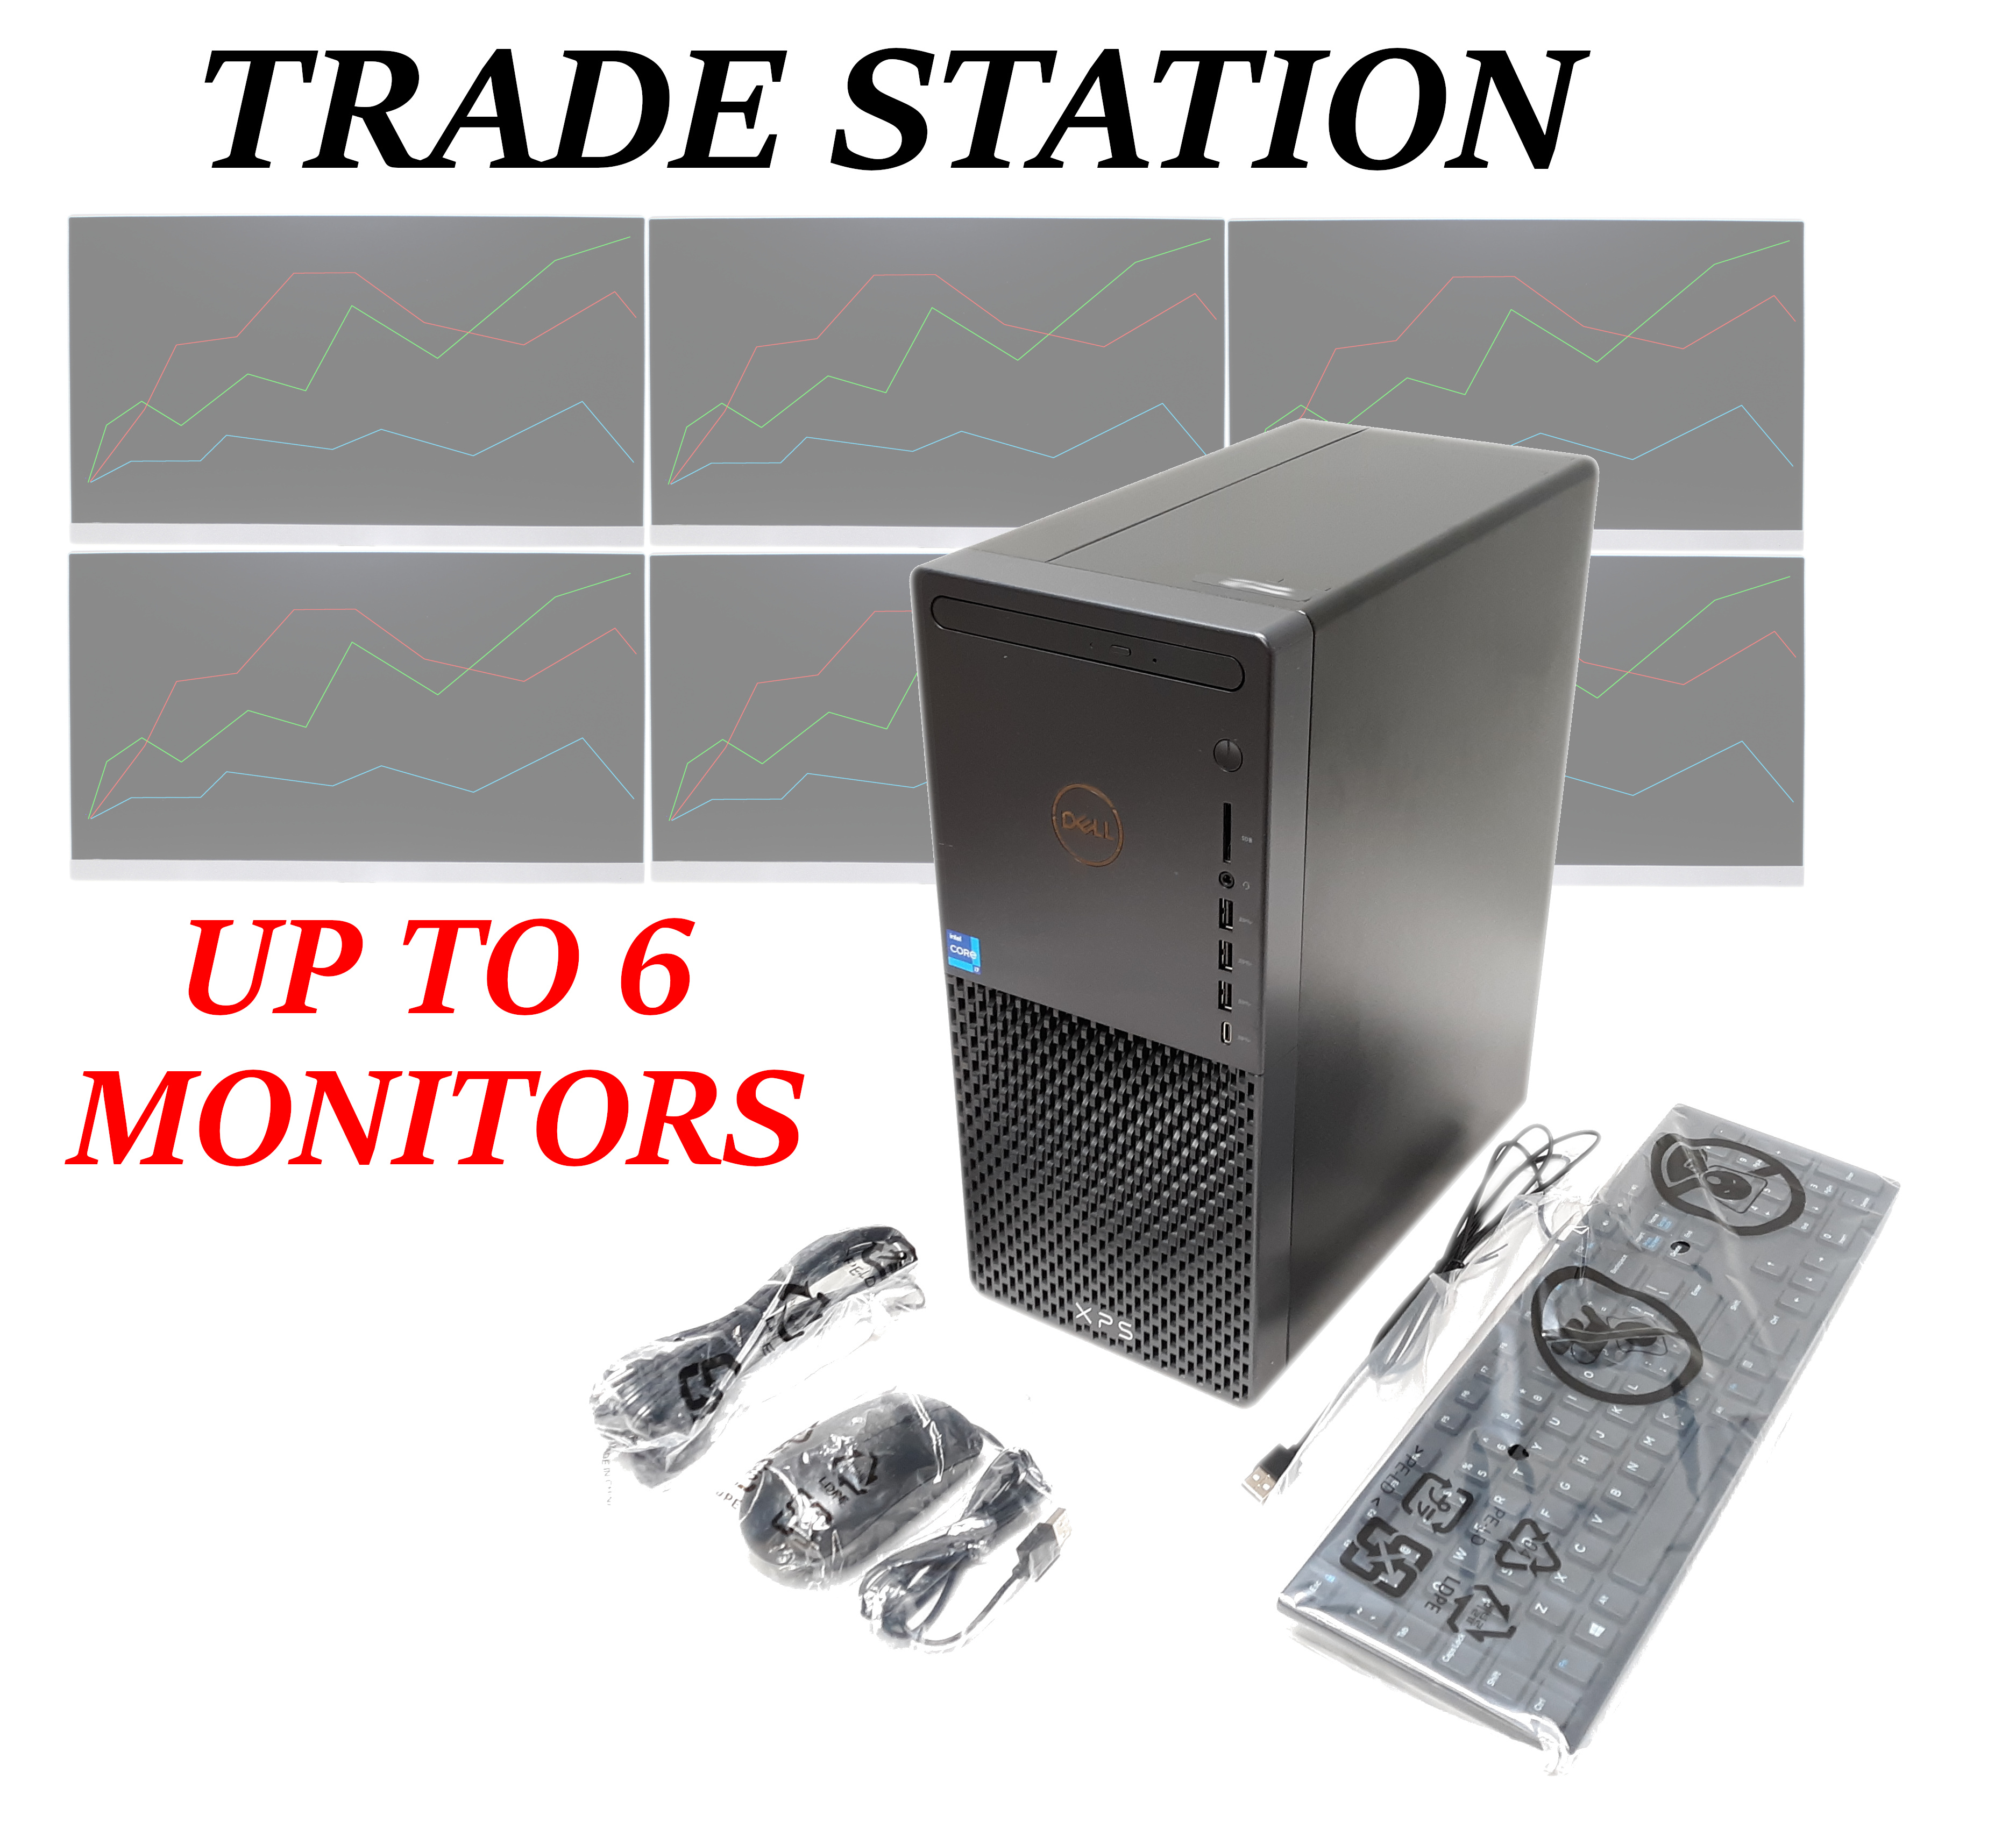 Dell XPS 8940 Trade Station up to 6 Monitors i7-11700 8C/16T SSD M.2 512GB HDD 1TB RAM 32GB Wi-Fi - Click Image to Close